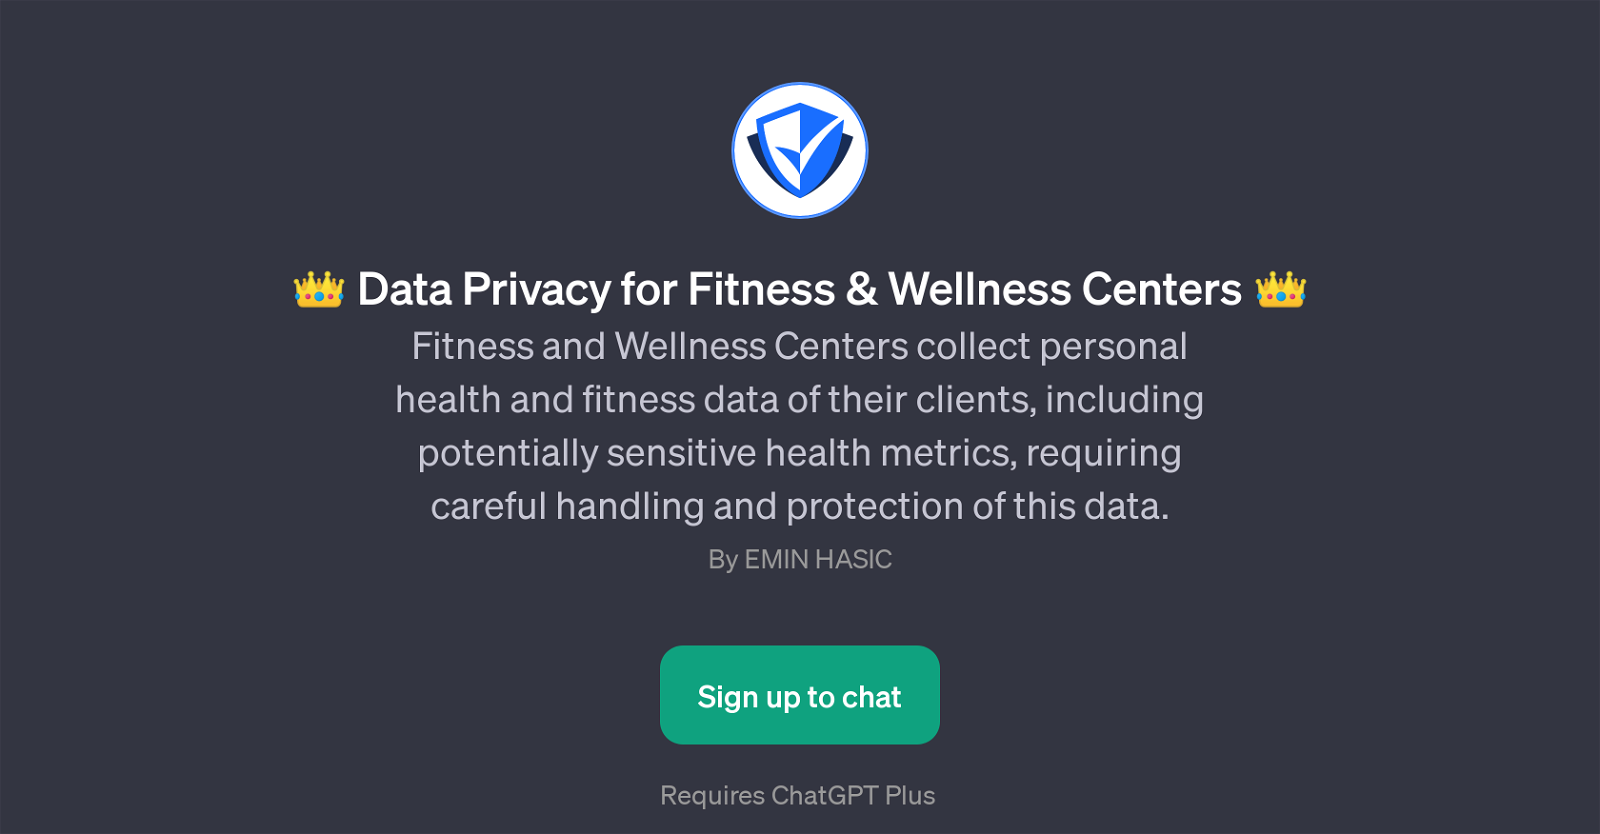 Data Privacy for Fitness & Wellness Centers website